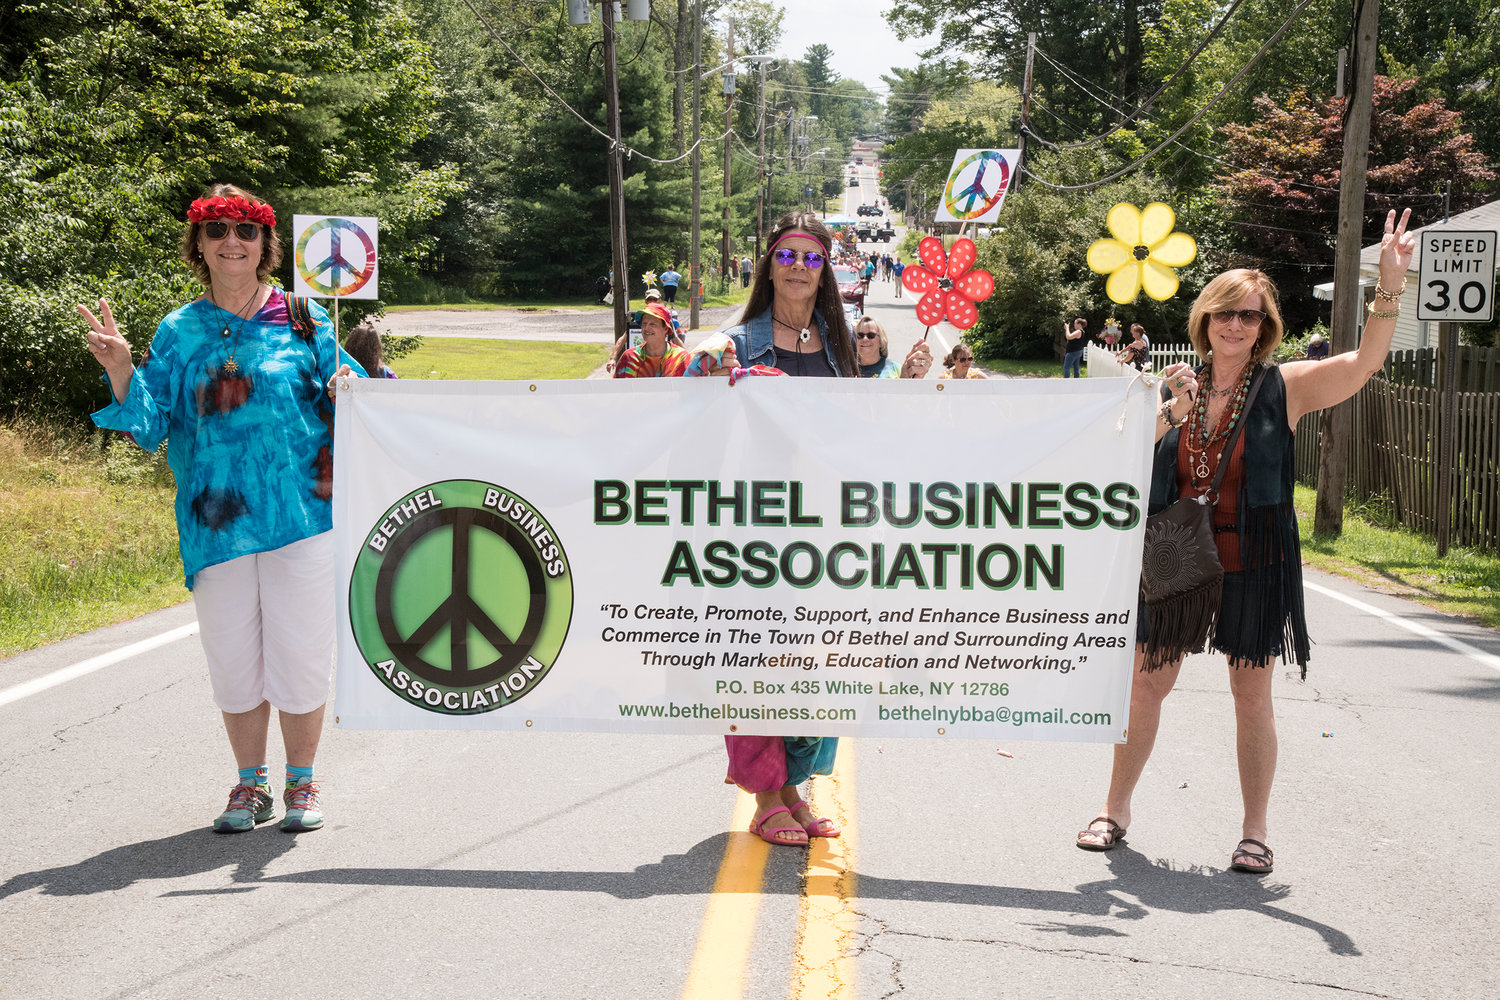 One of many local organizations to participate in the parade wearing “time period” attire, the Bethel Business Association’s (L-R) Julie Rozar, Suzanne White, and Carol Malek lead with the banner.